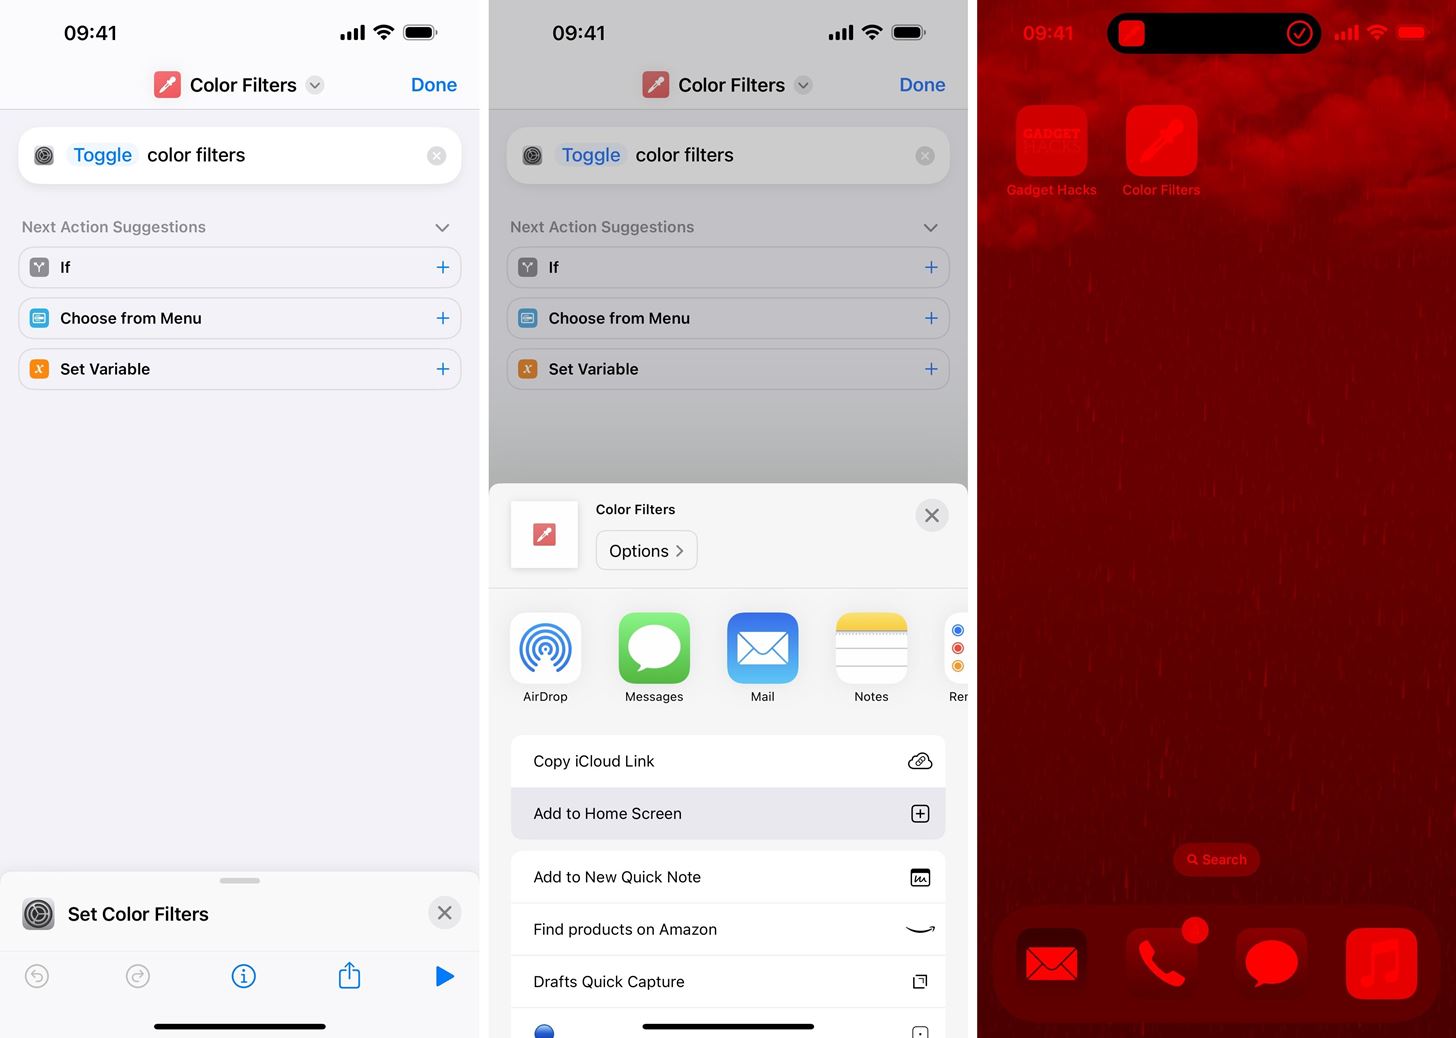 Keep Your Night Vision Sharp with the iPhone's Hidden Red Screen